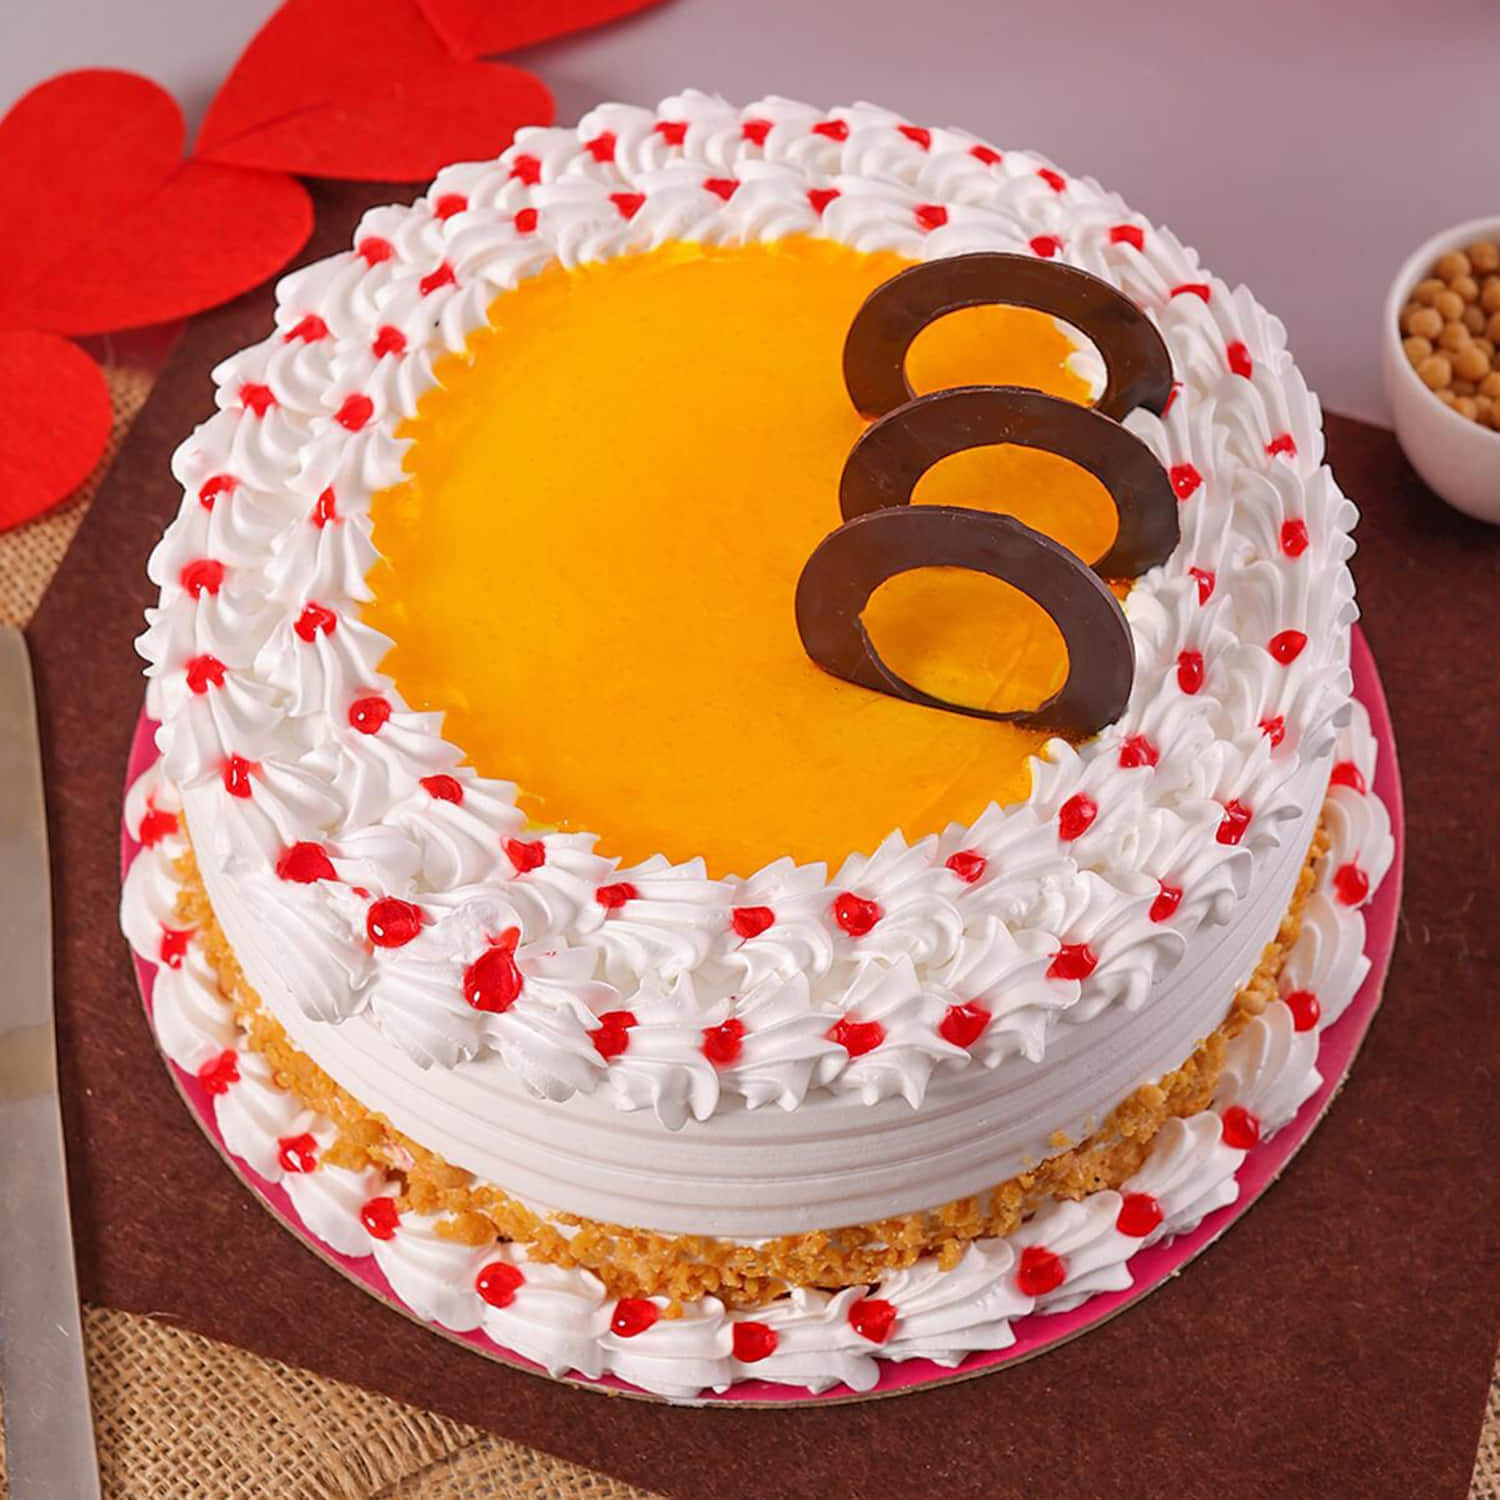 Online Butterscotch Cakes delivery in 3 hours | Order Butterscotch Cakes  online | Same day